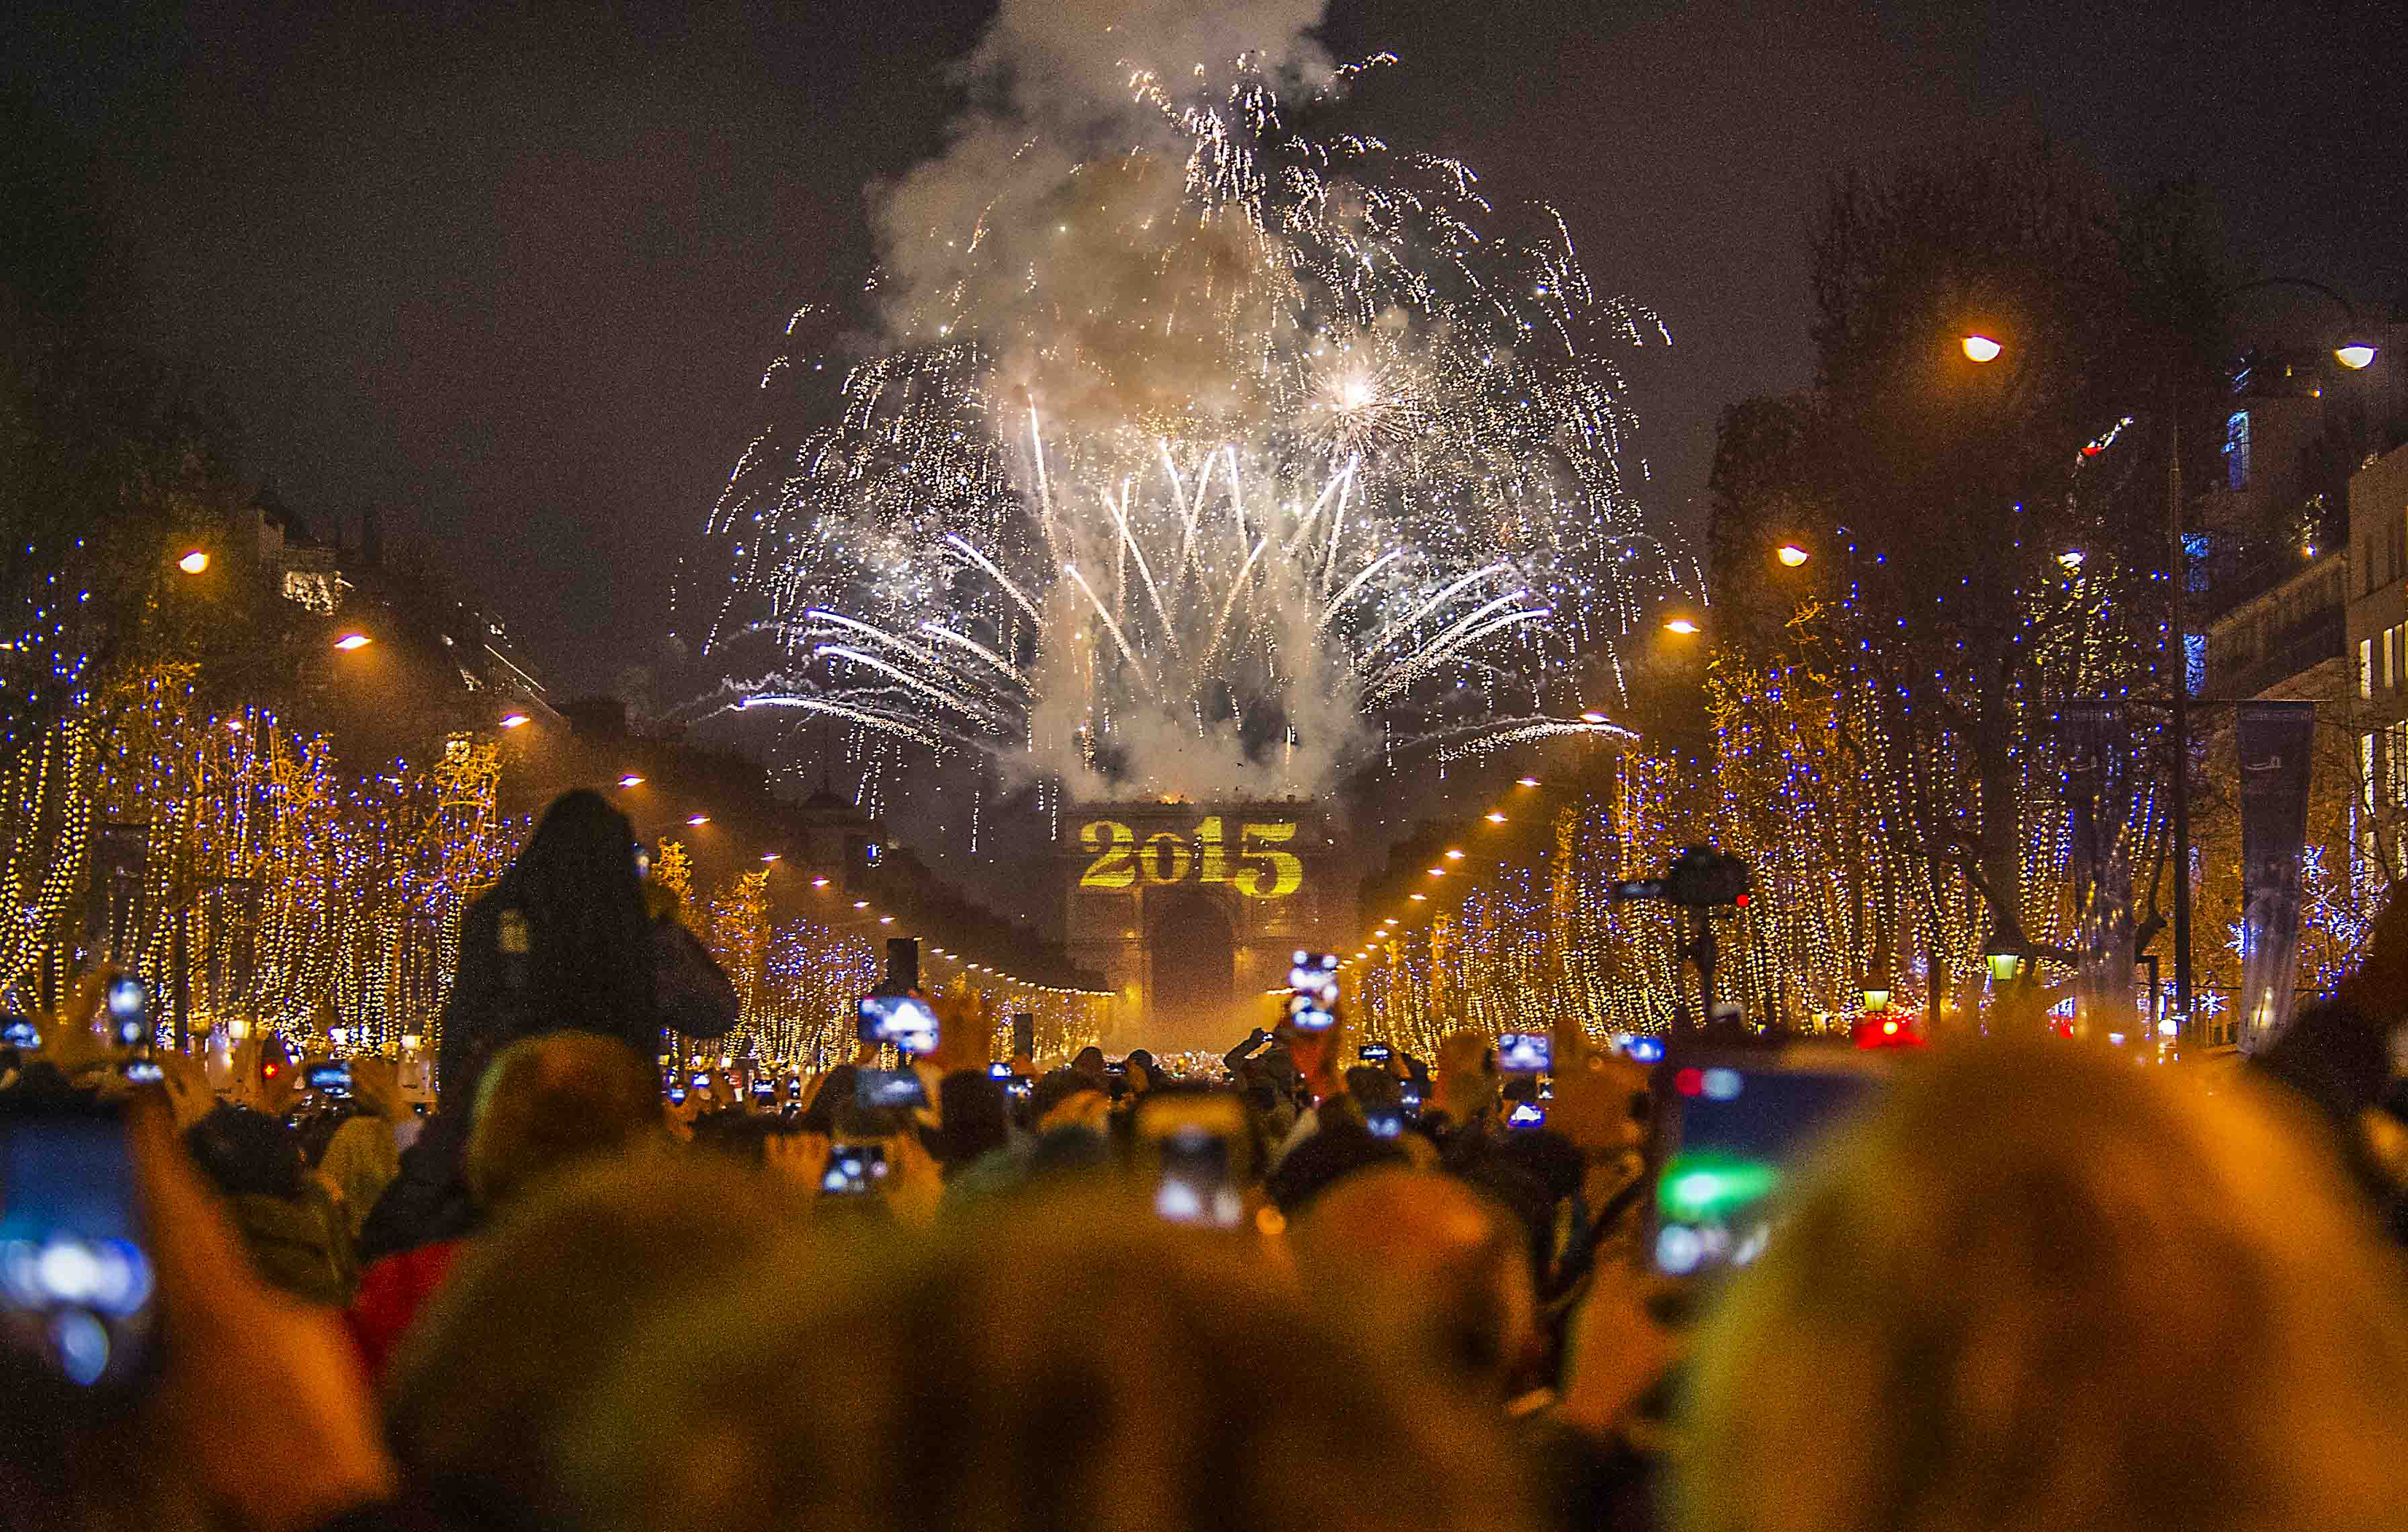 Paris on New Year's Eve